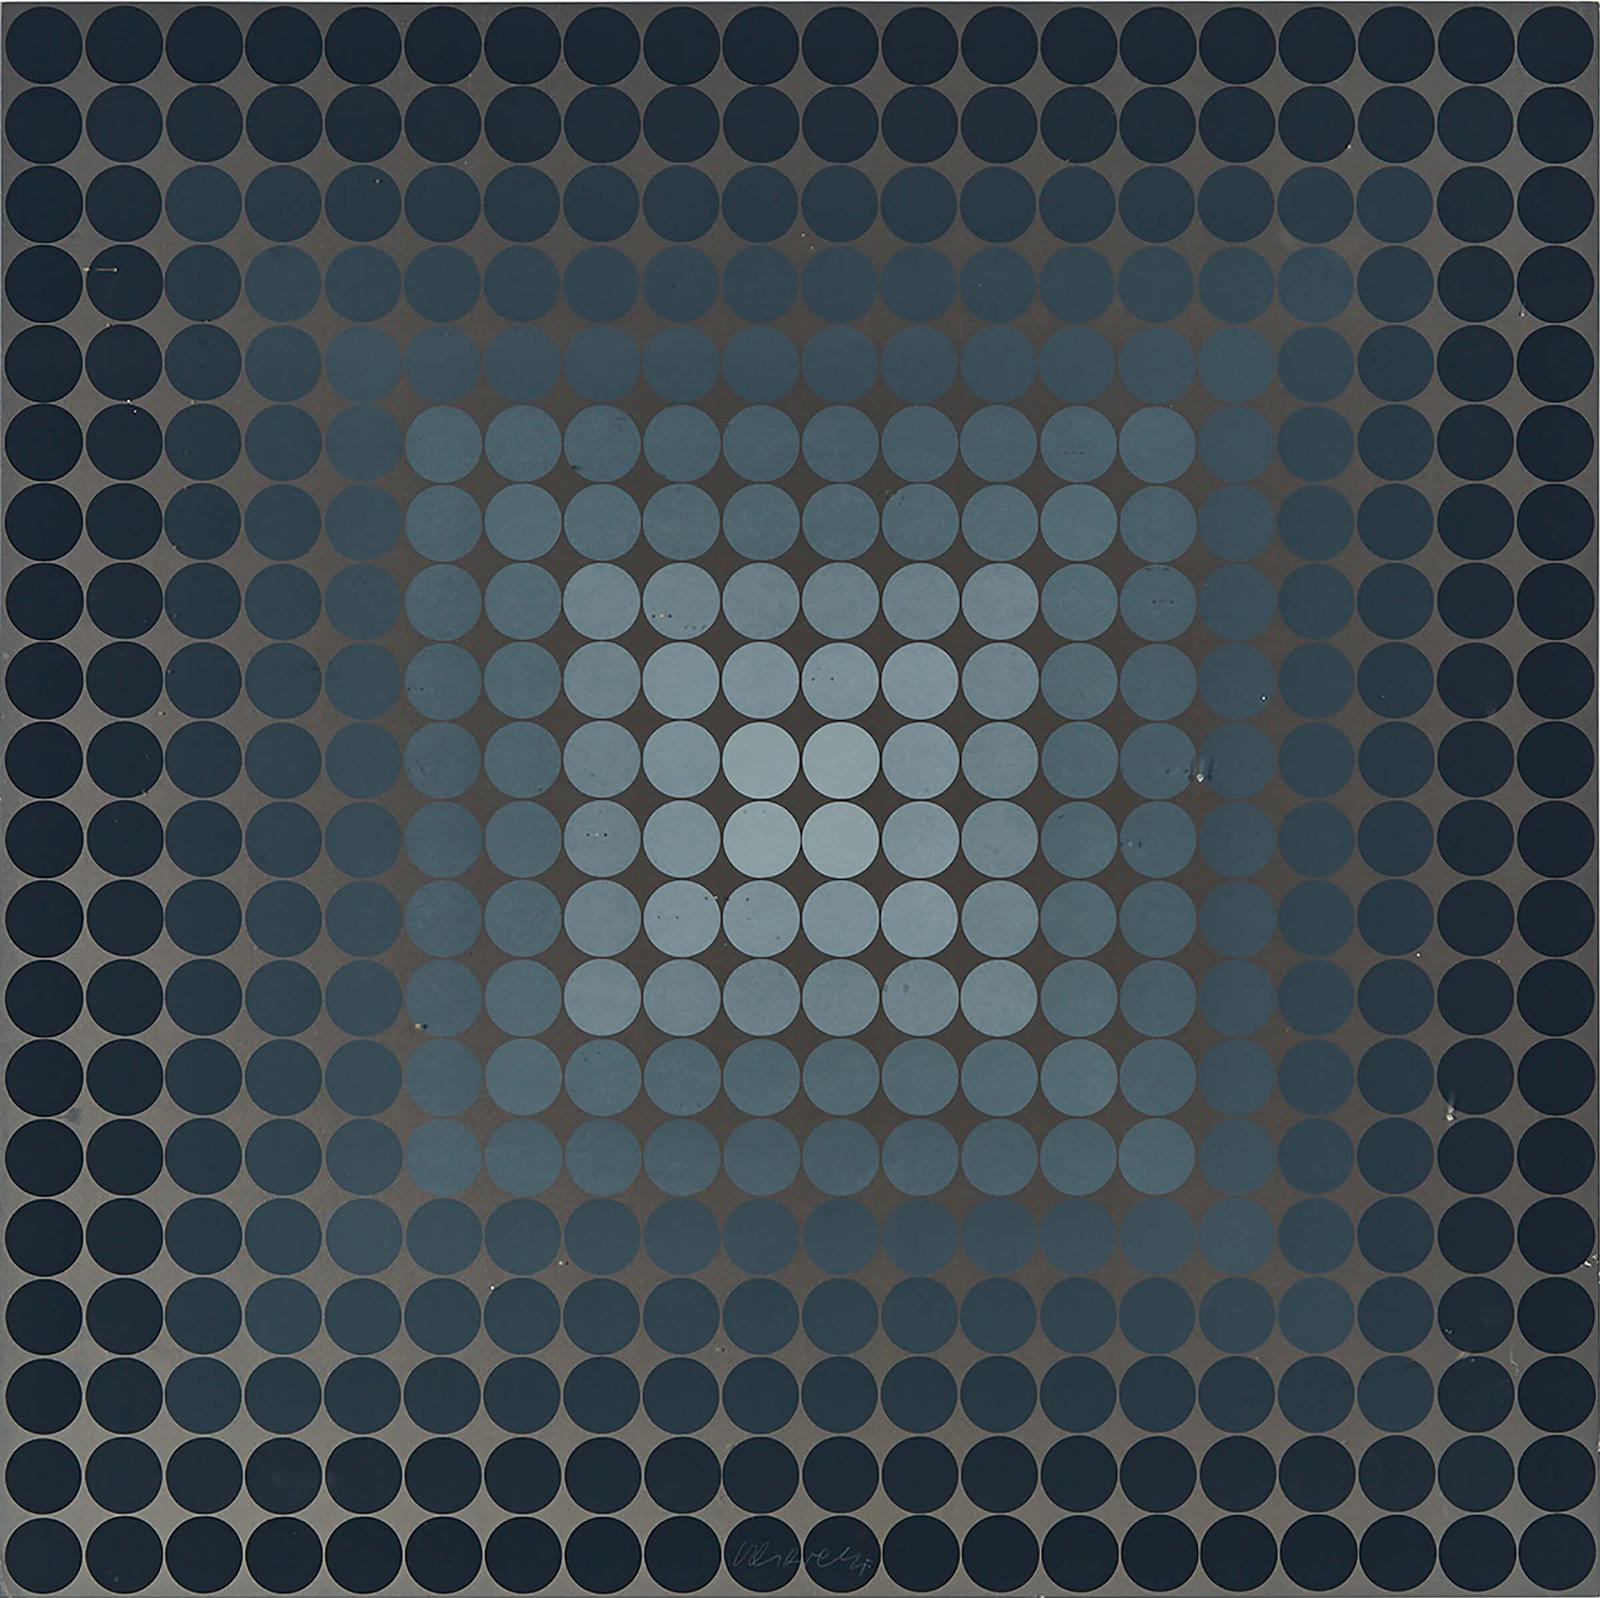 Victor Vasarely (1906-1997) - Untitled (From Cta 102), 1966